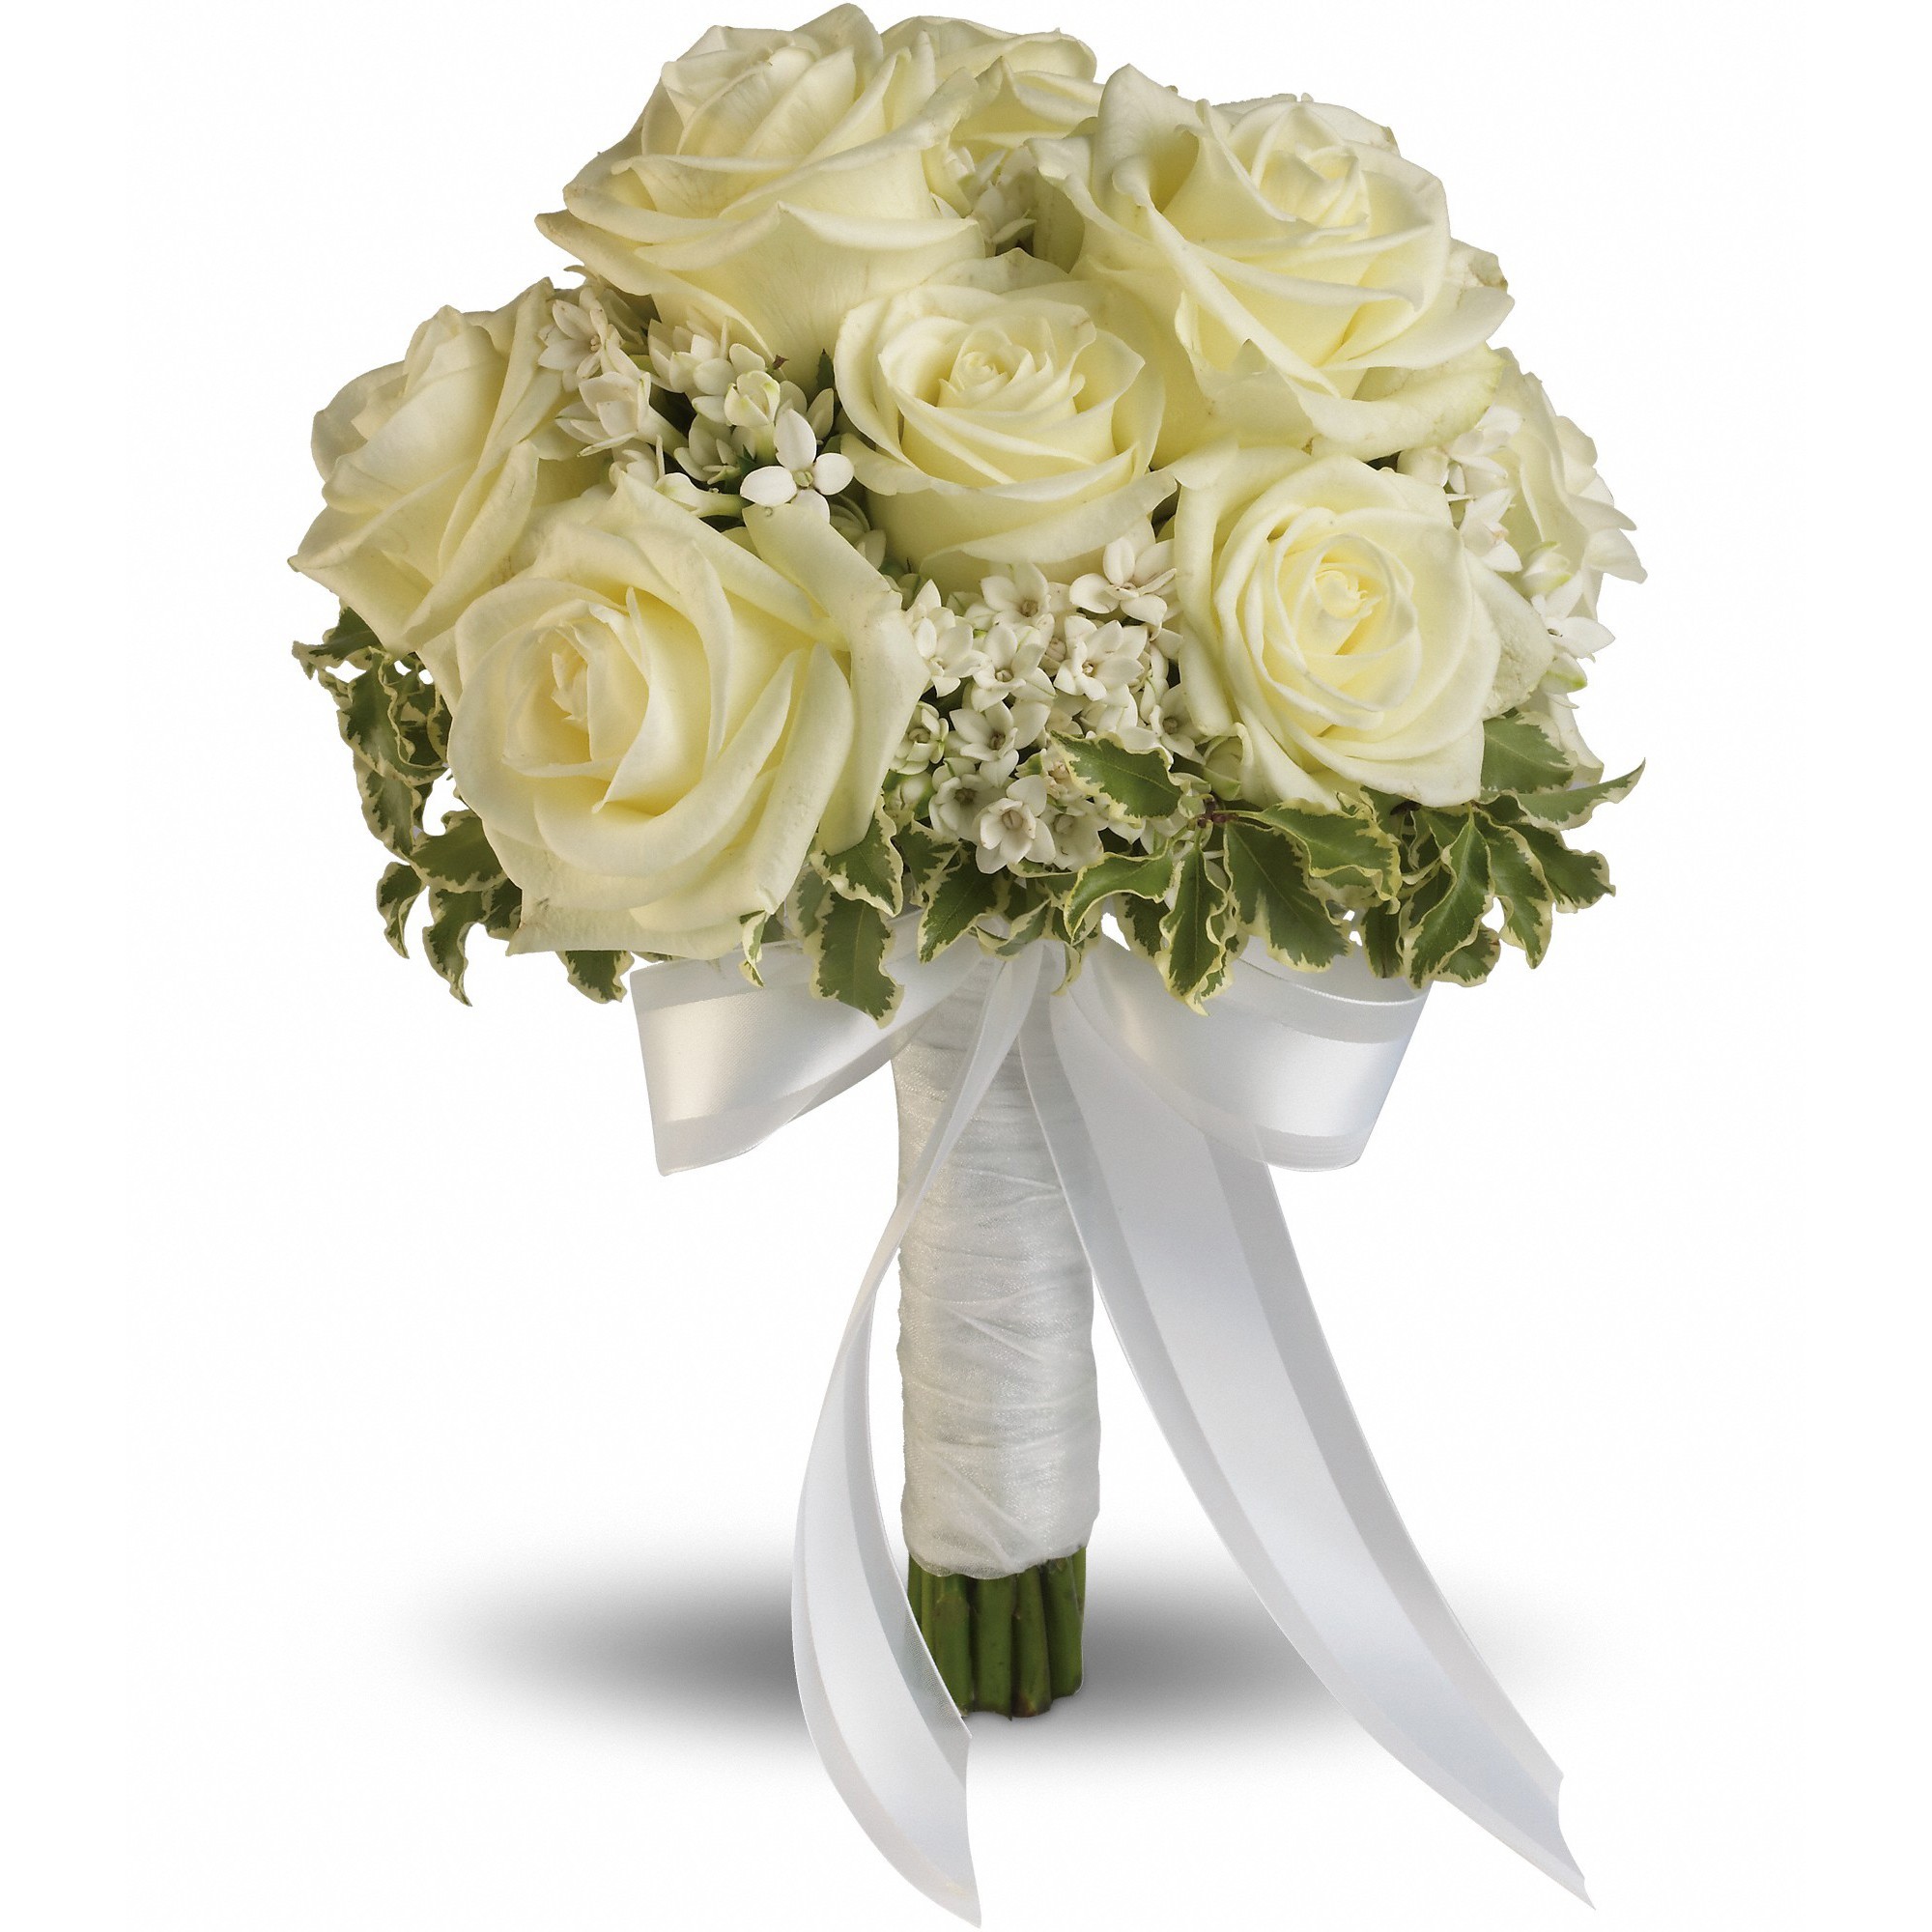 Lacy Rose Bouquet in Statesboro, GA | Frazier's Flowers and Gifts